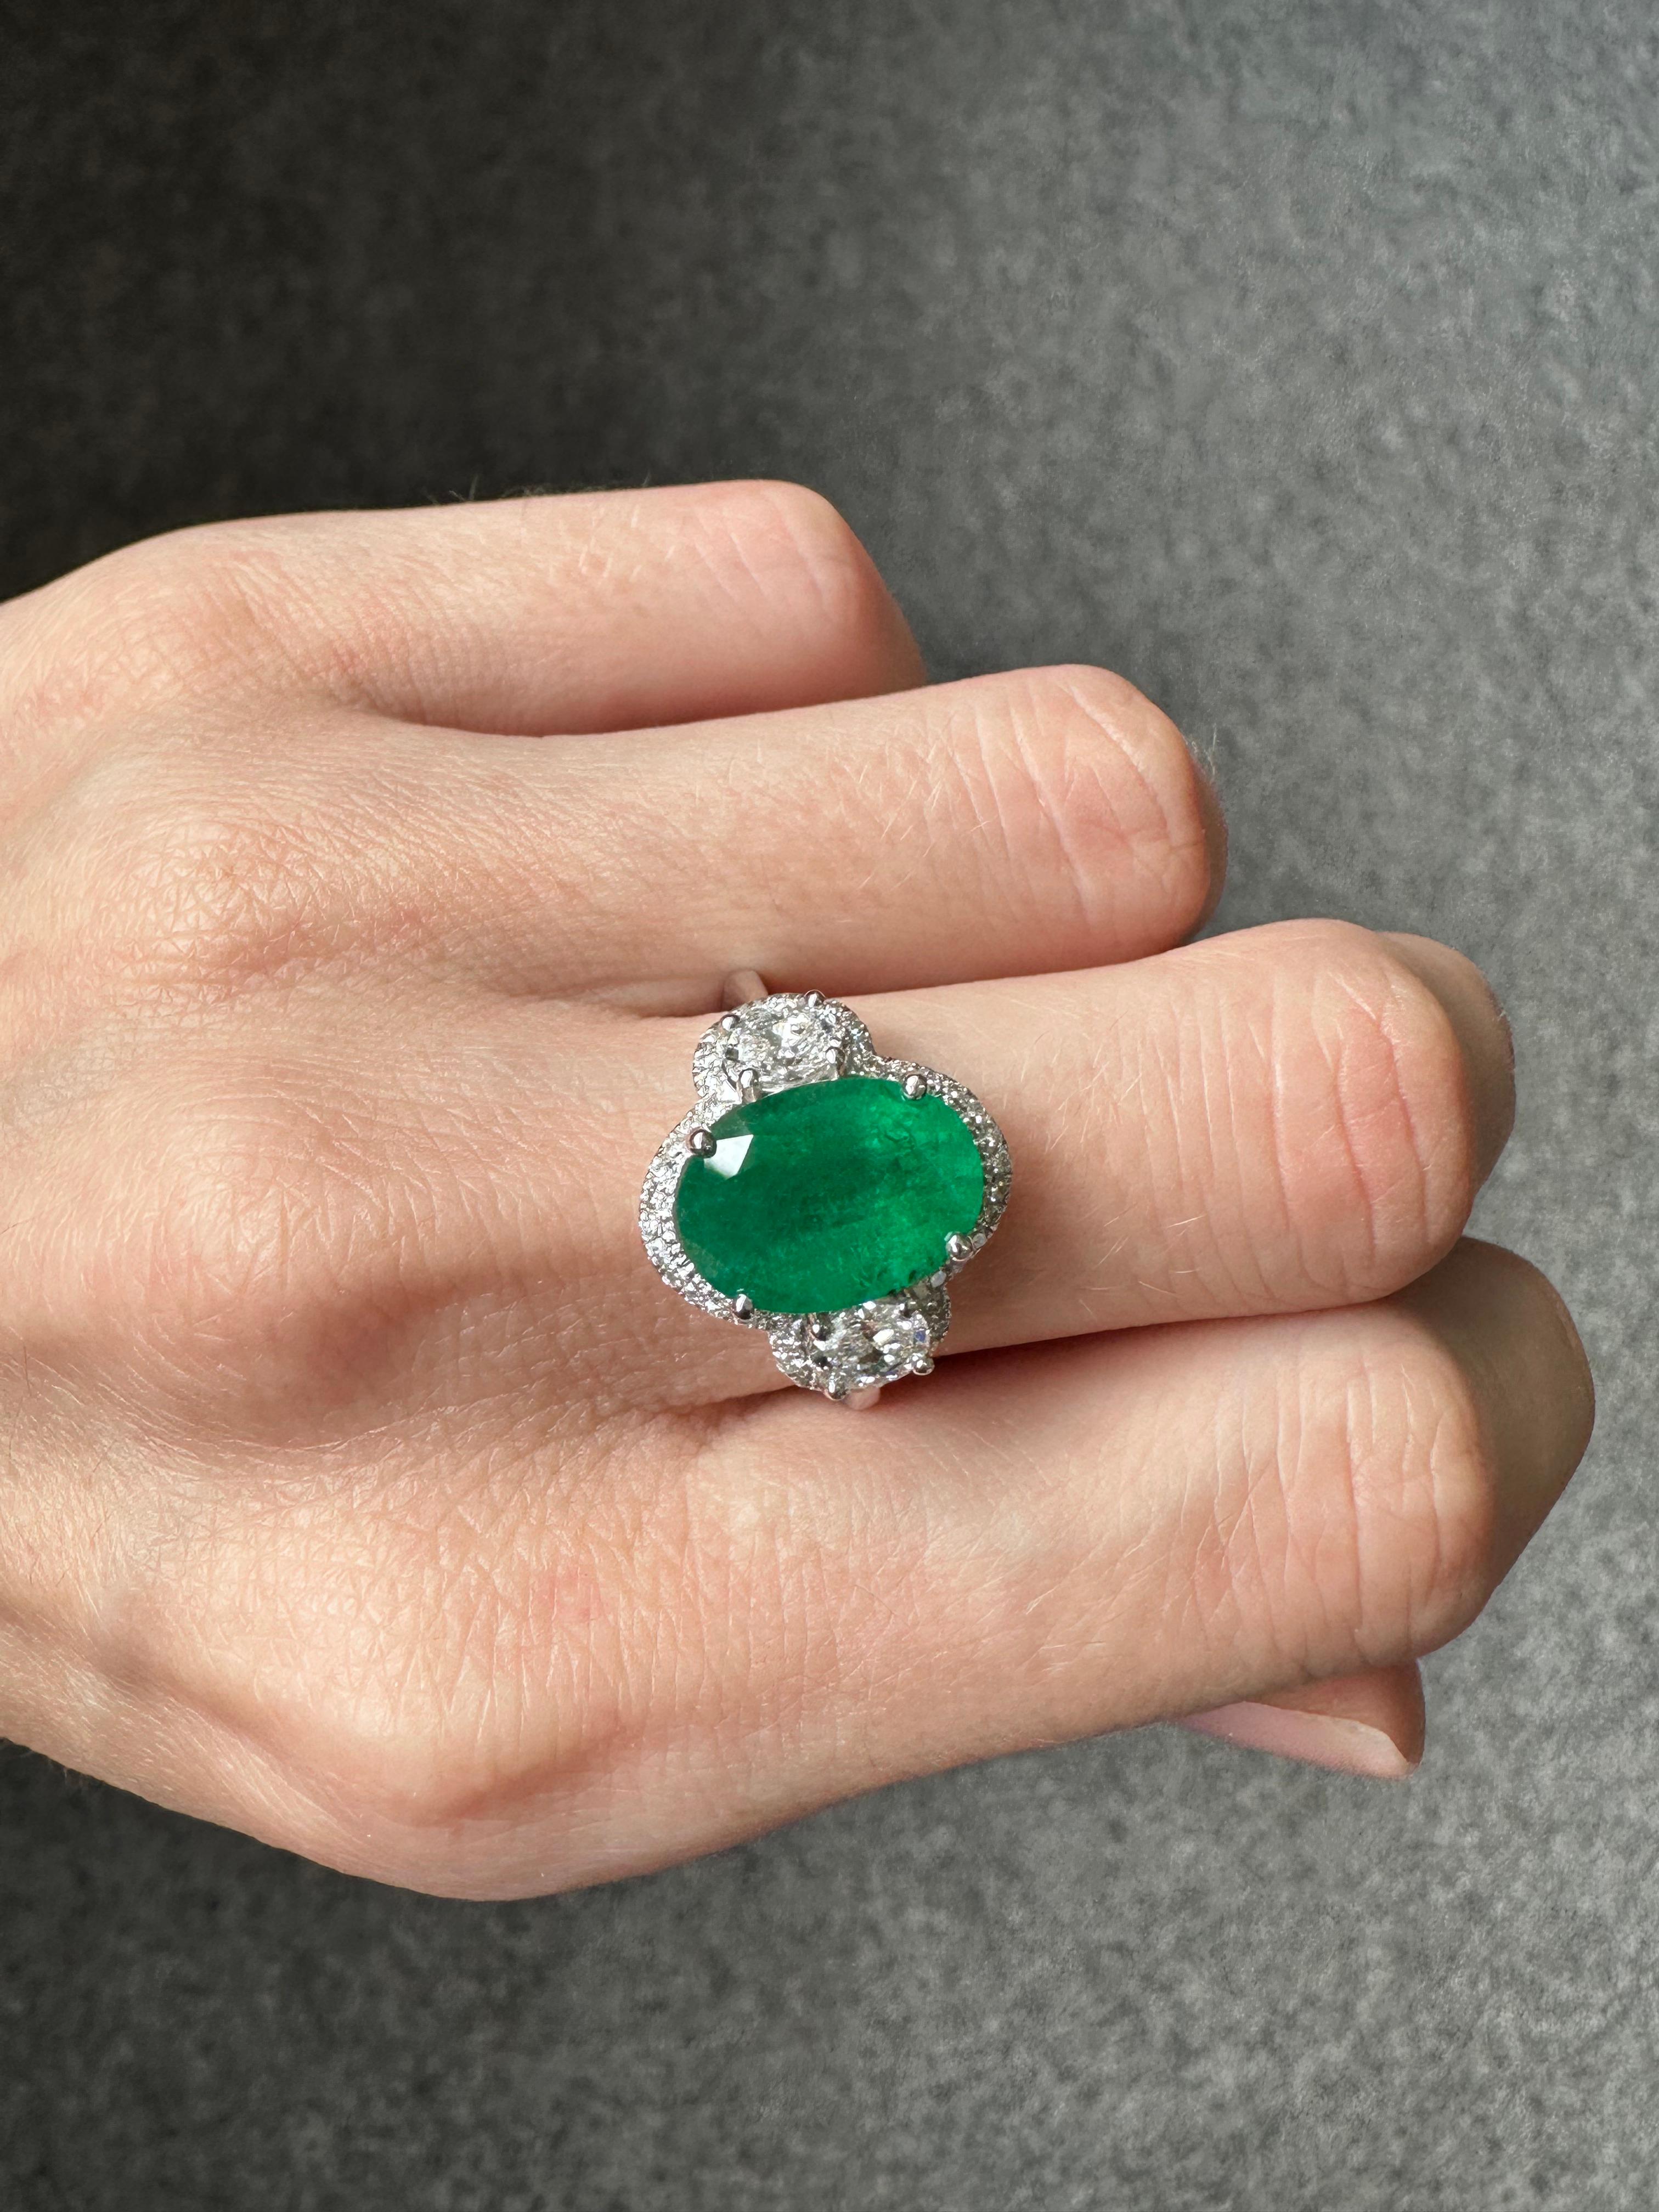 A classic 4.06 carat Zambian Emerald three stone engagement ring, with 0.61 carat oval shaped Diamond side stones and a Diamond halo. The center stone is an ideal vivid green color, with great luster and transparency. The stones are set in solid 18K